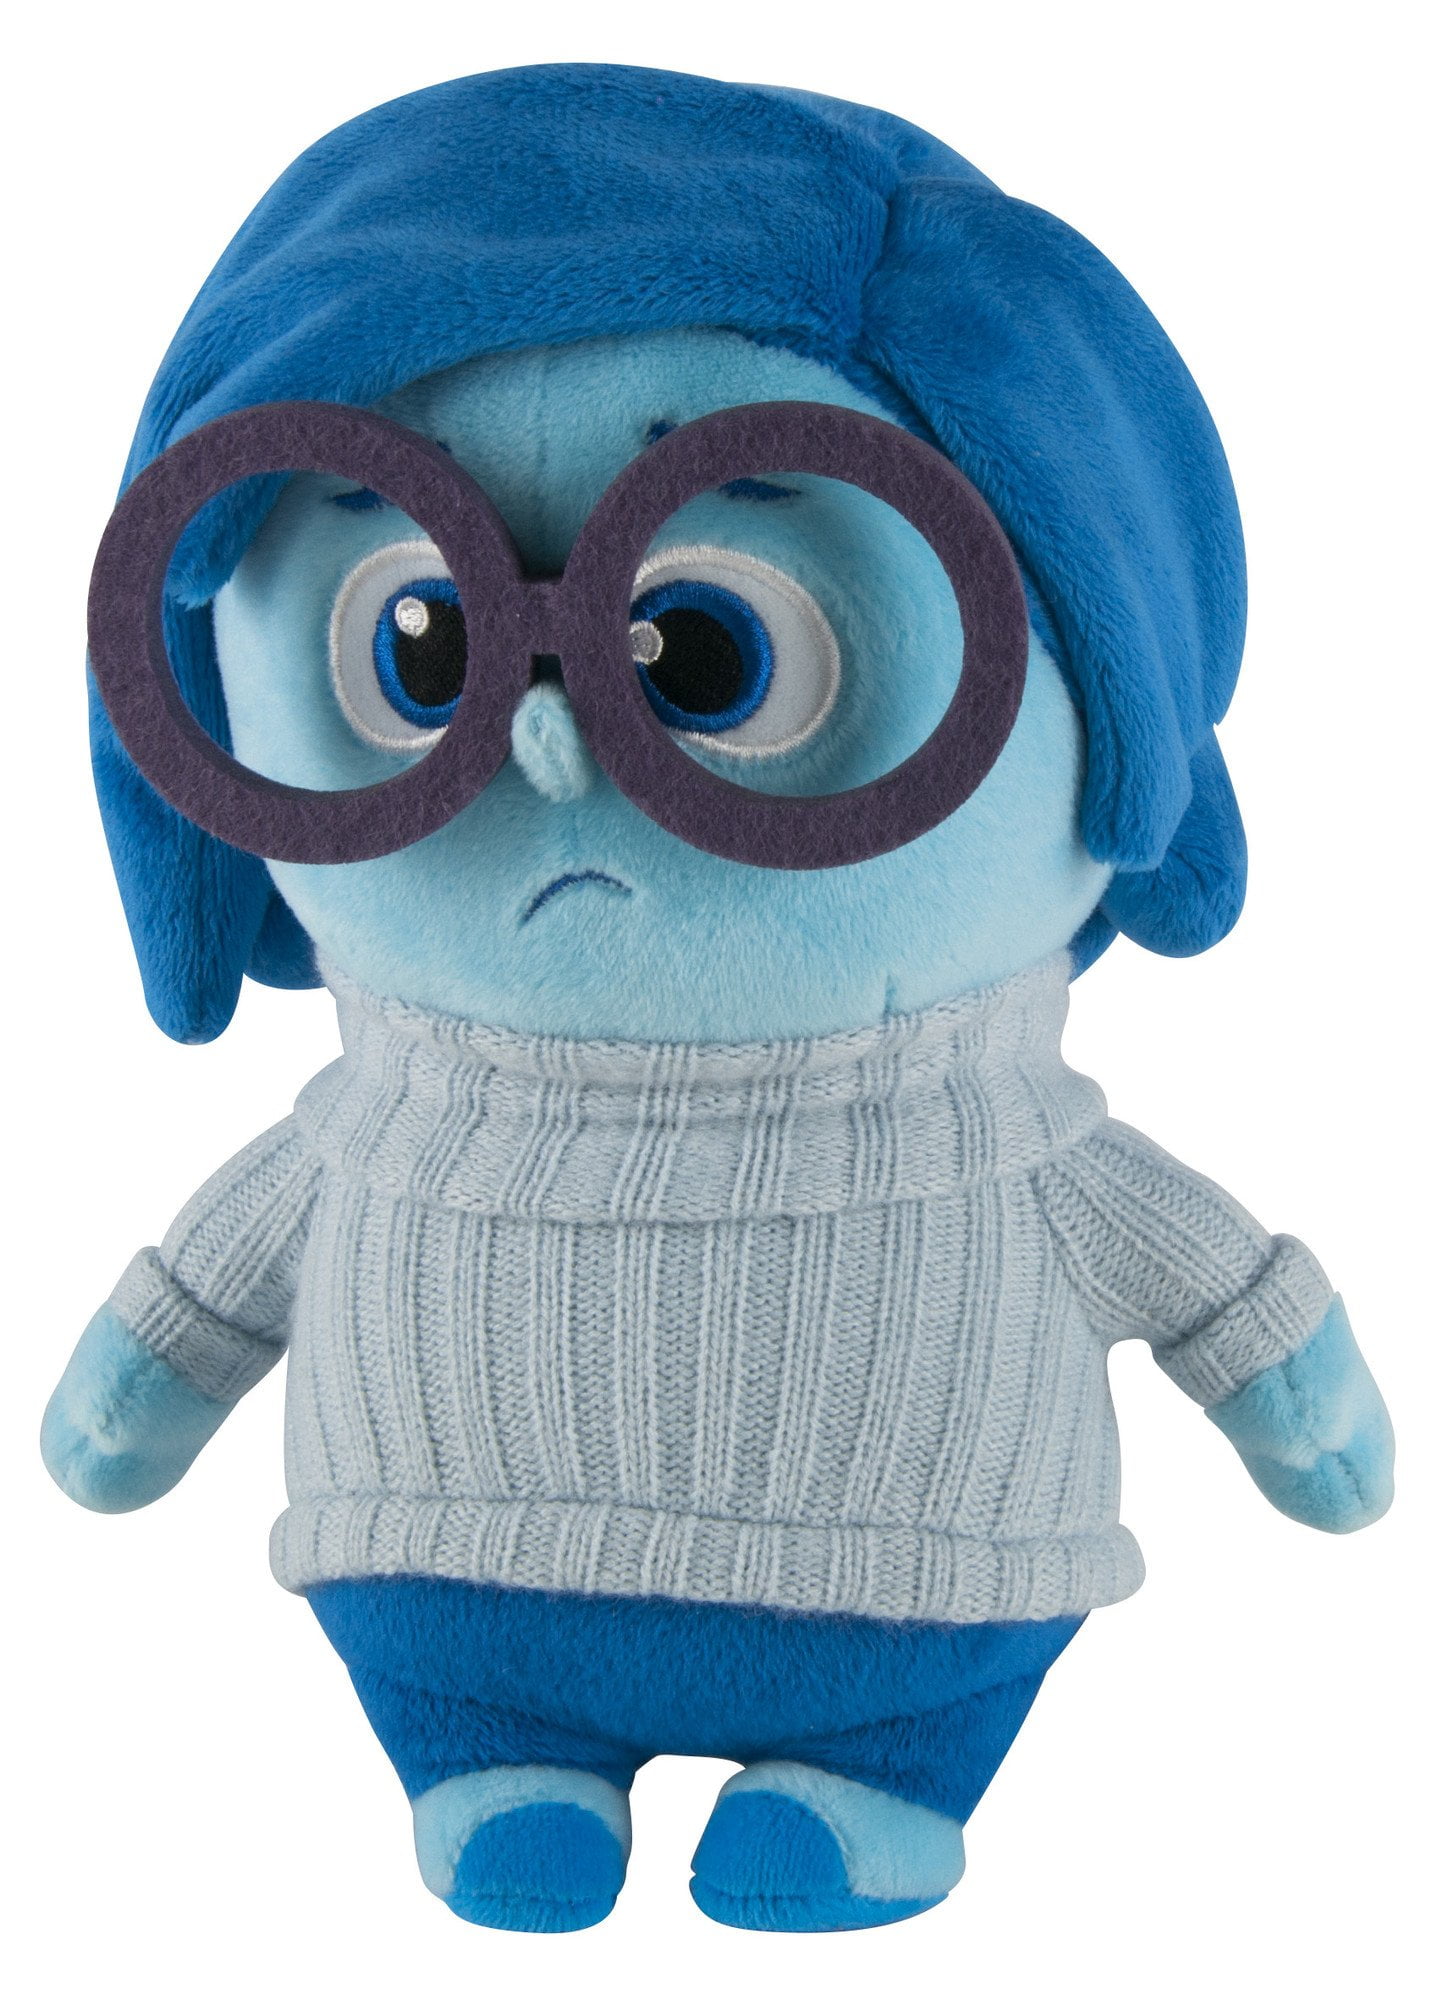 BRAND NEW INSIDE OUT SADNESS CHARACTER 10INCH SOFT TOY PLUSH 